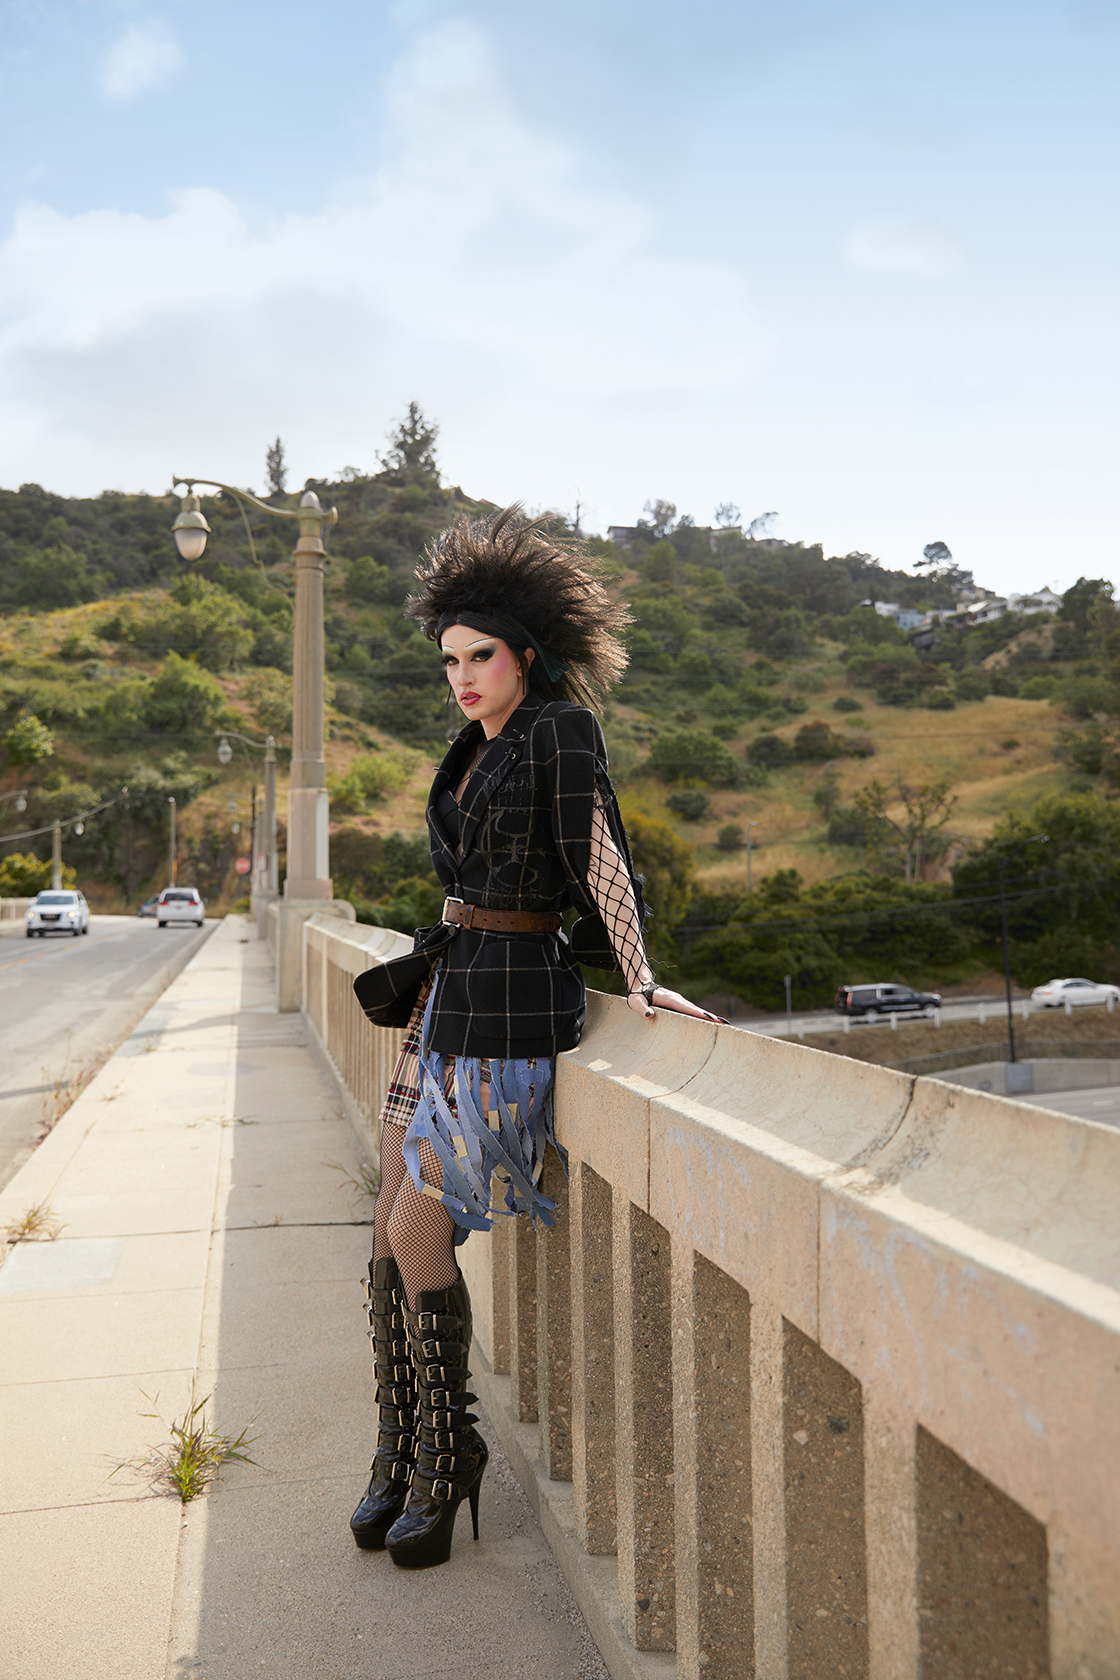 Jesse Clark in punk inspired drag leaning against a hand rail on a bridge over a freeway